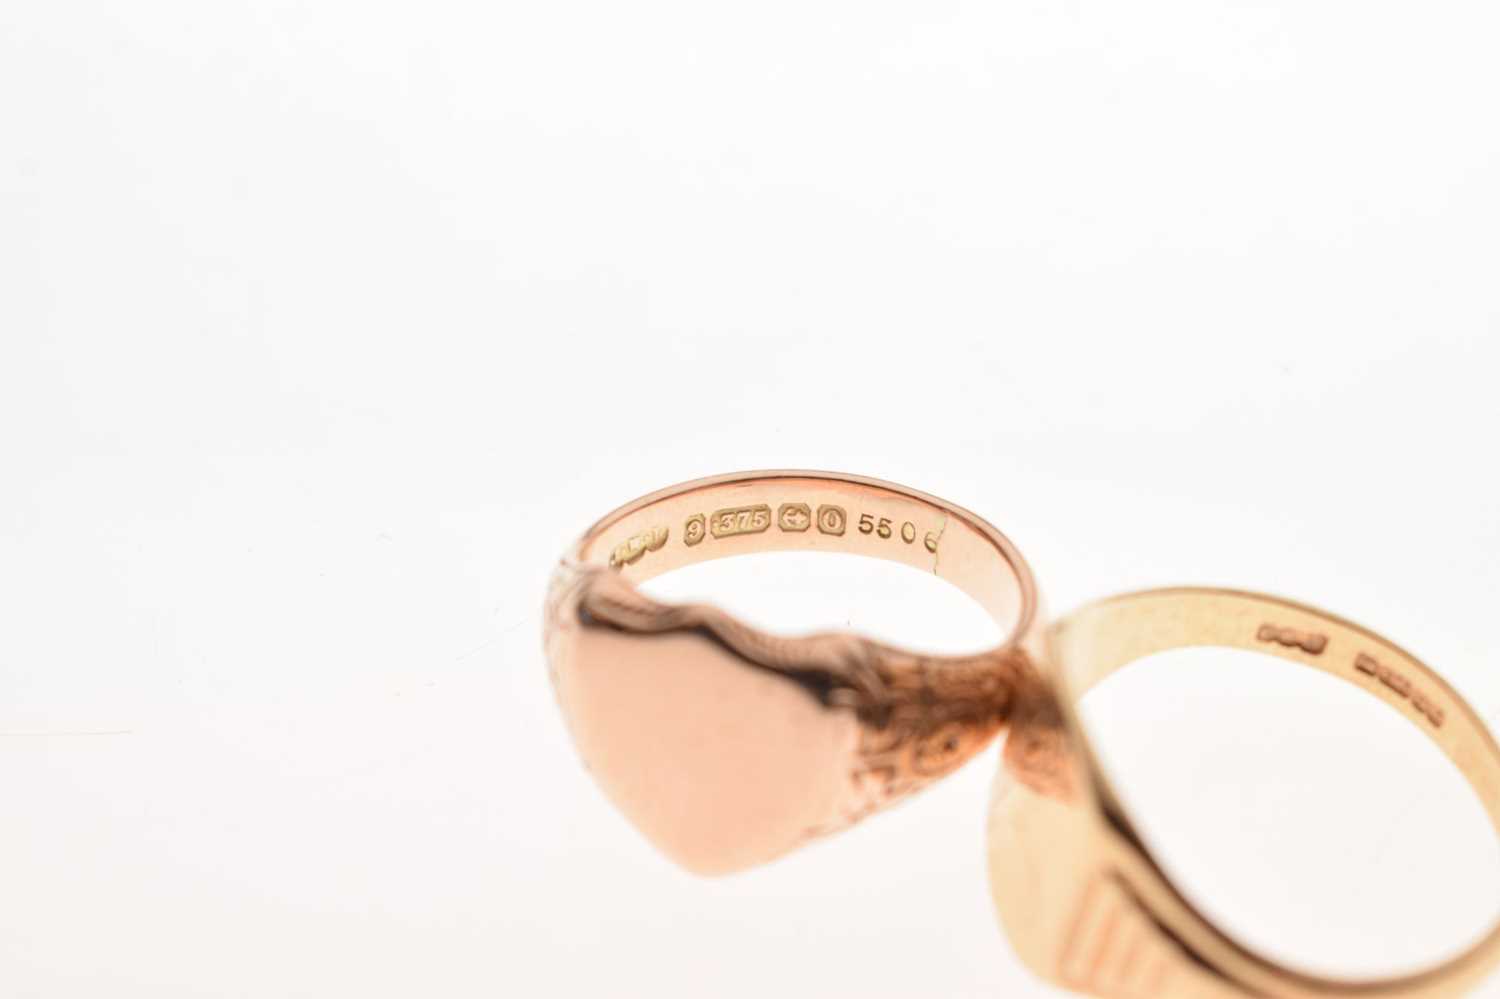 Two 9ct gold signet rings - Image 5 of 7